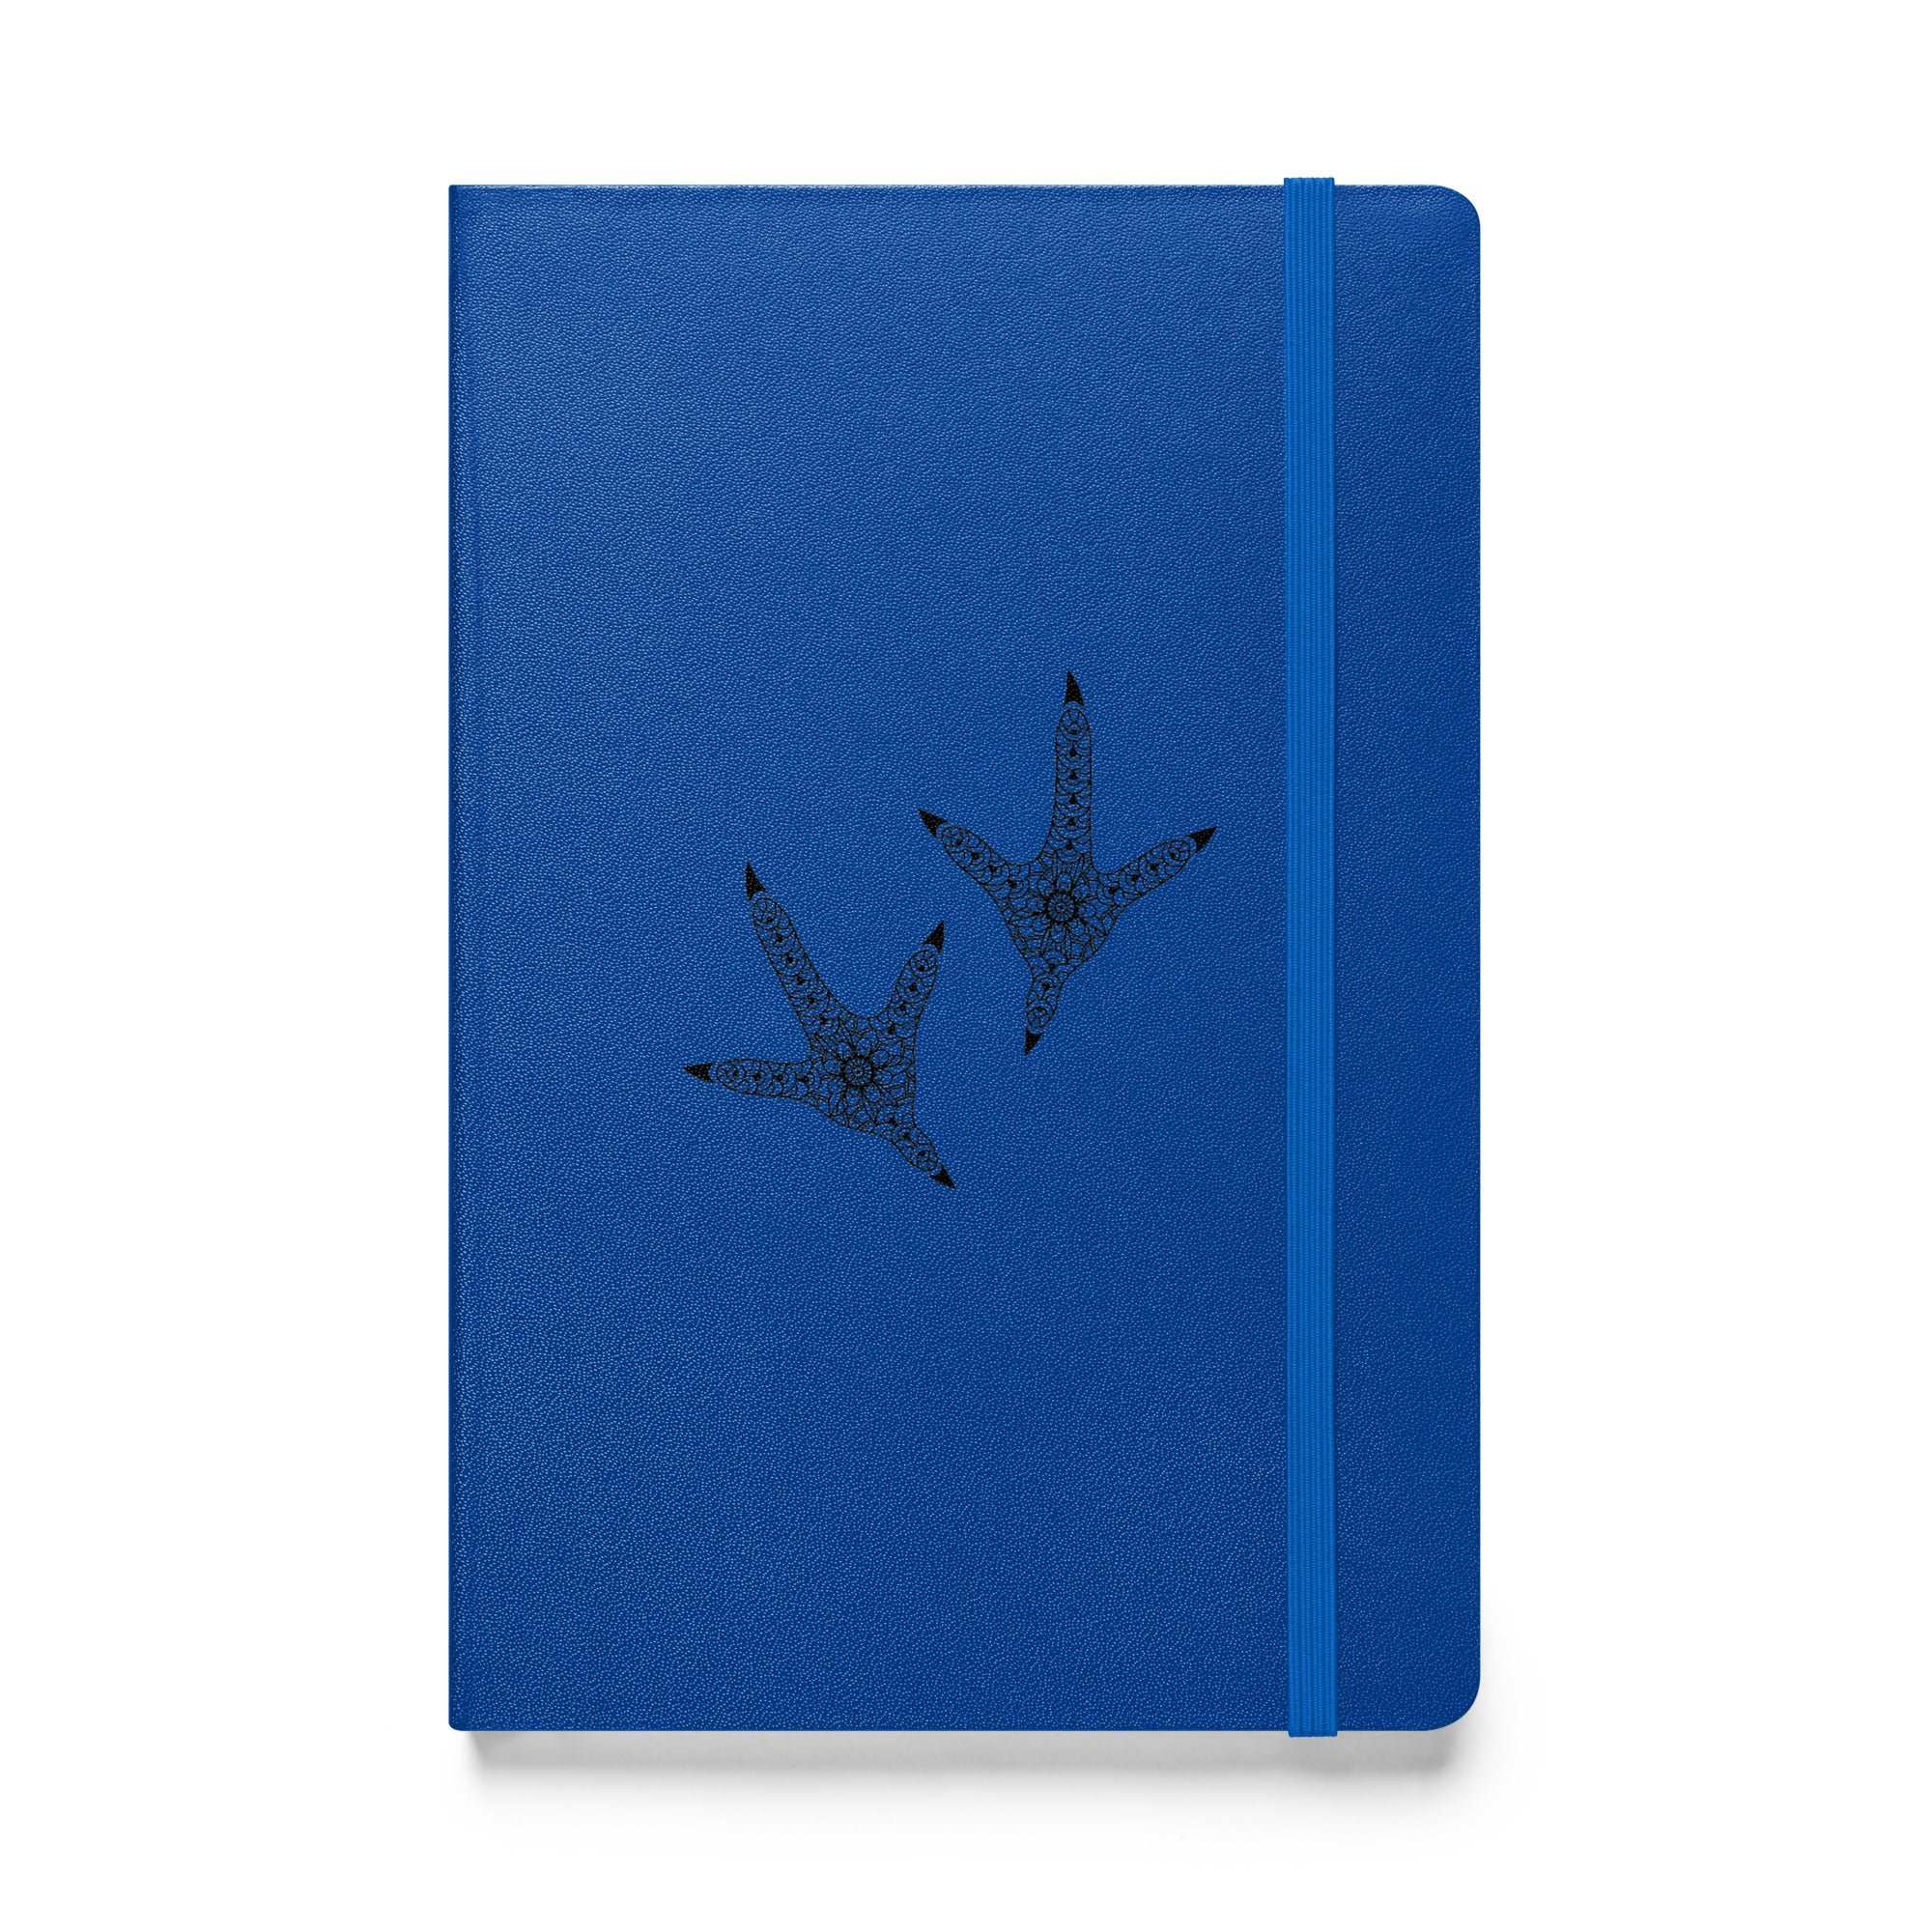 Chicken Feet Hardcover Bound Notebook - Cluck It All Farms